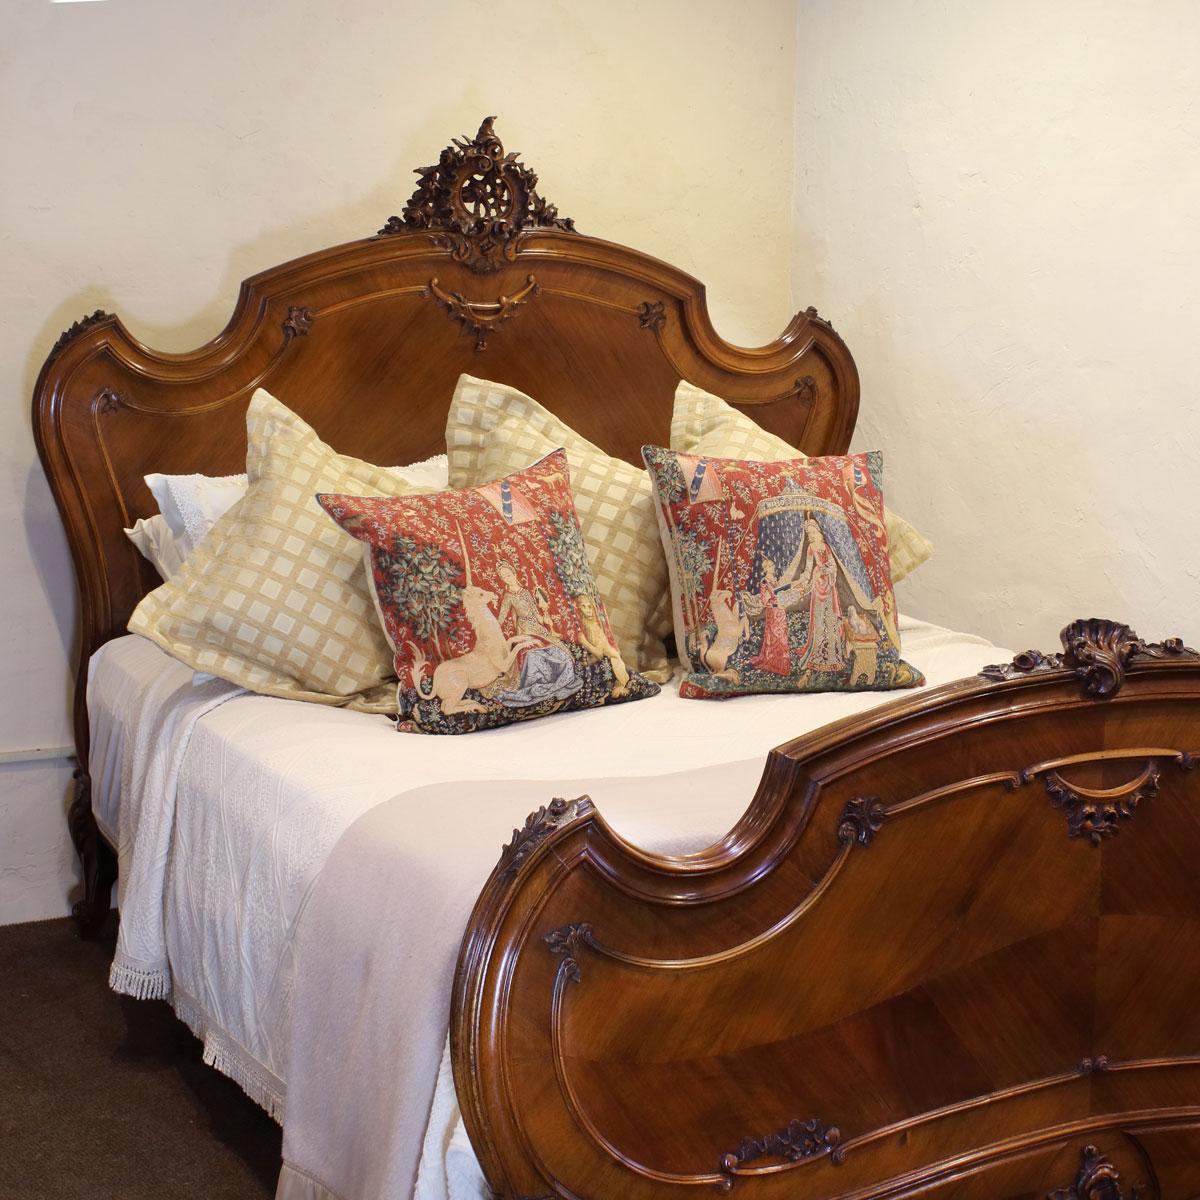 A fine Louis XV style walnut bed with carving on pediment and foot panel.

This bed accepts a British King size or American Queen size, 5ft wide (60 inches or 150cm) base and mattress set.

The price is for the bed and a firm bed base to support